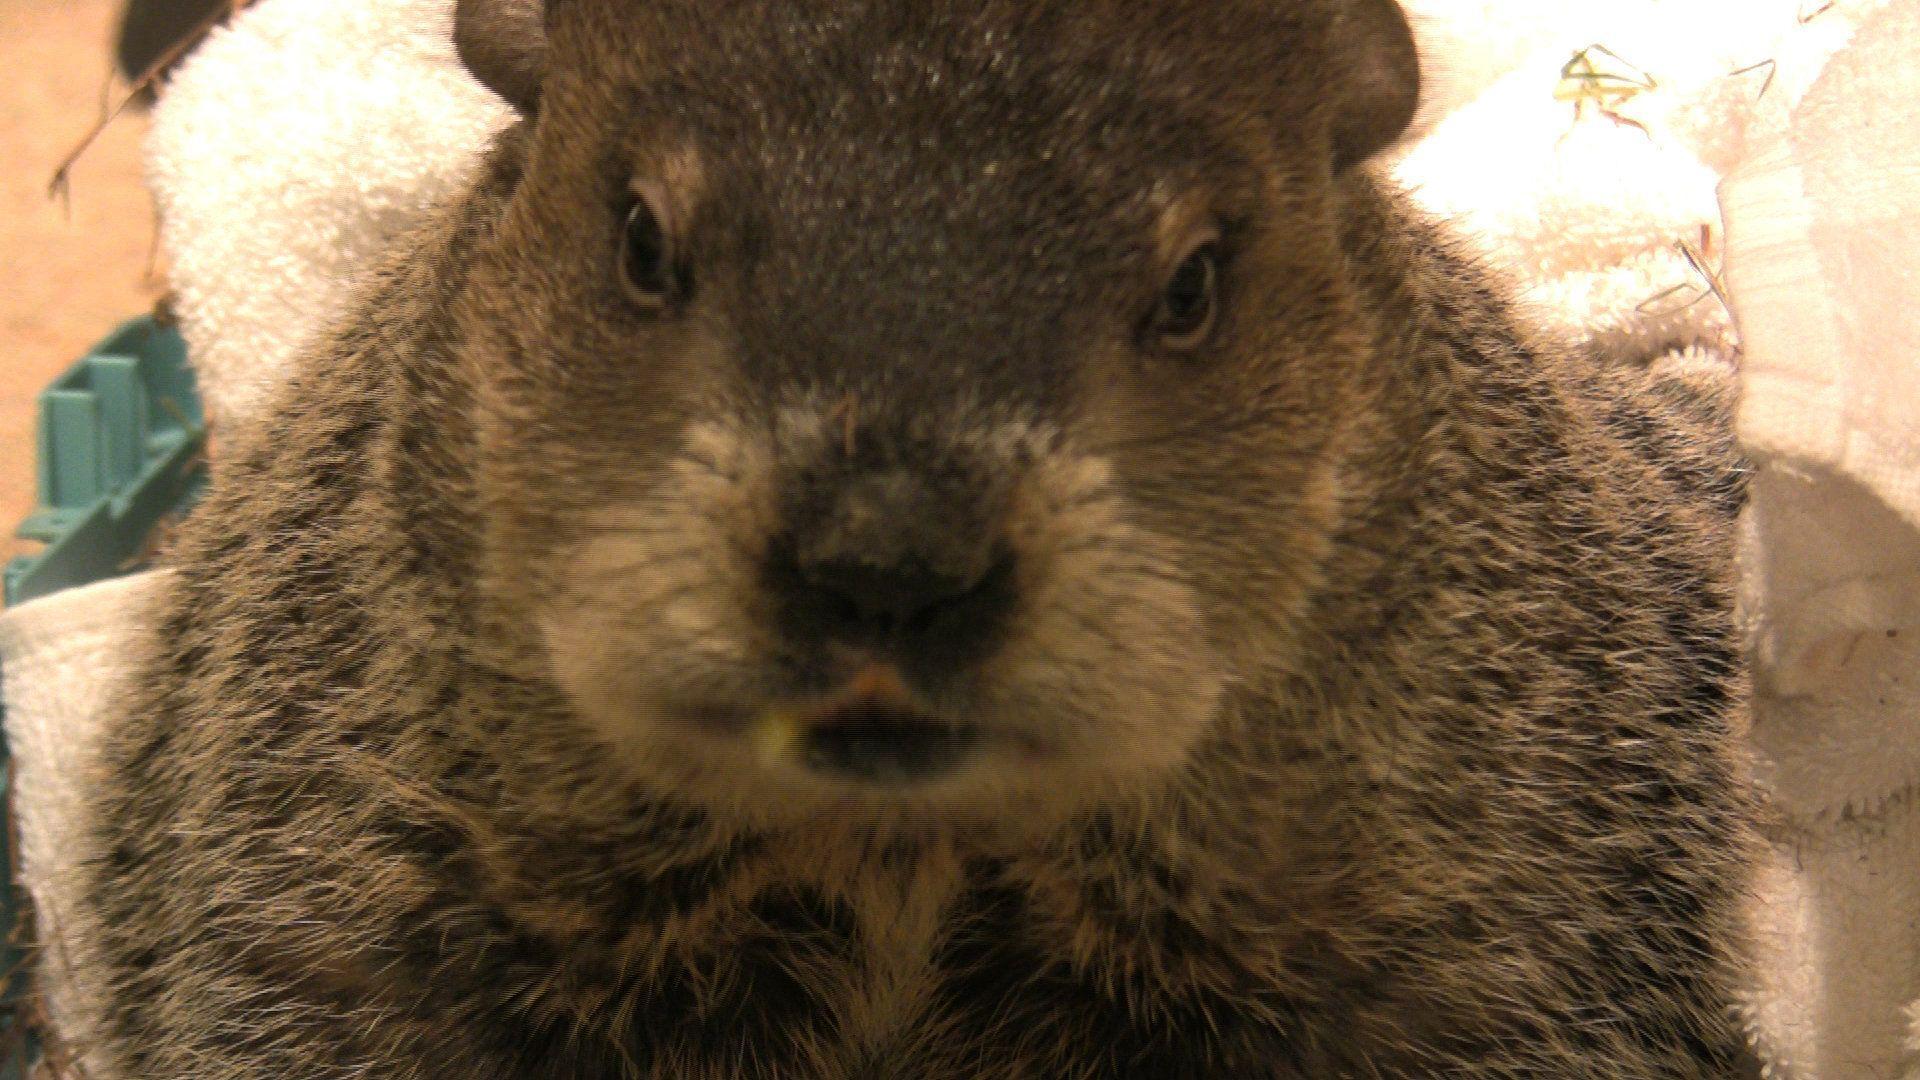 Groundhog Day 2011: Will Staten Island Chuck see his shadow